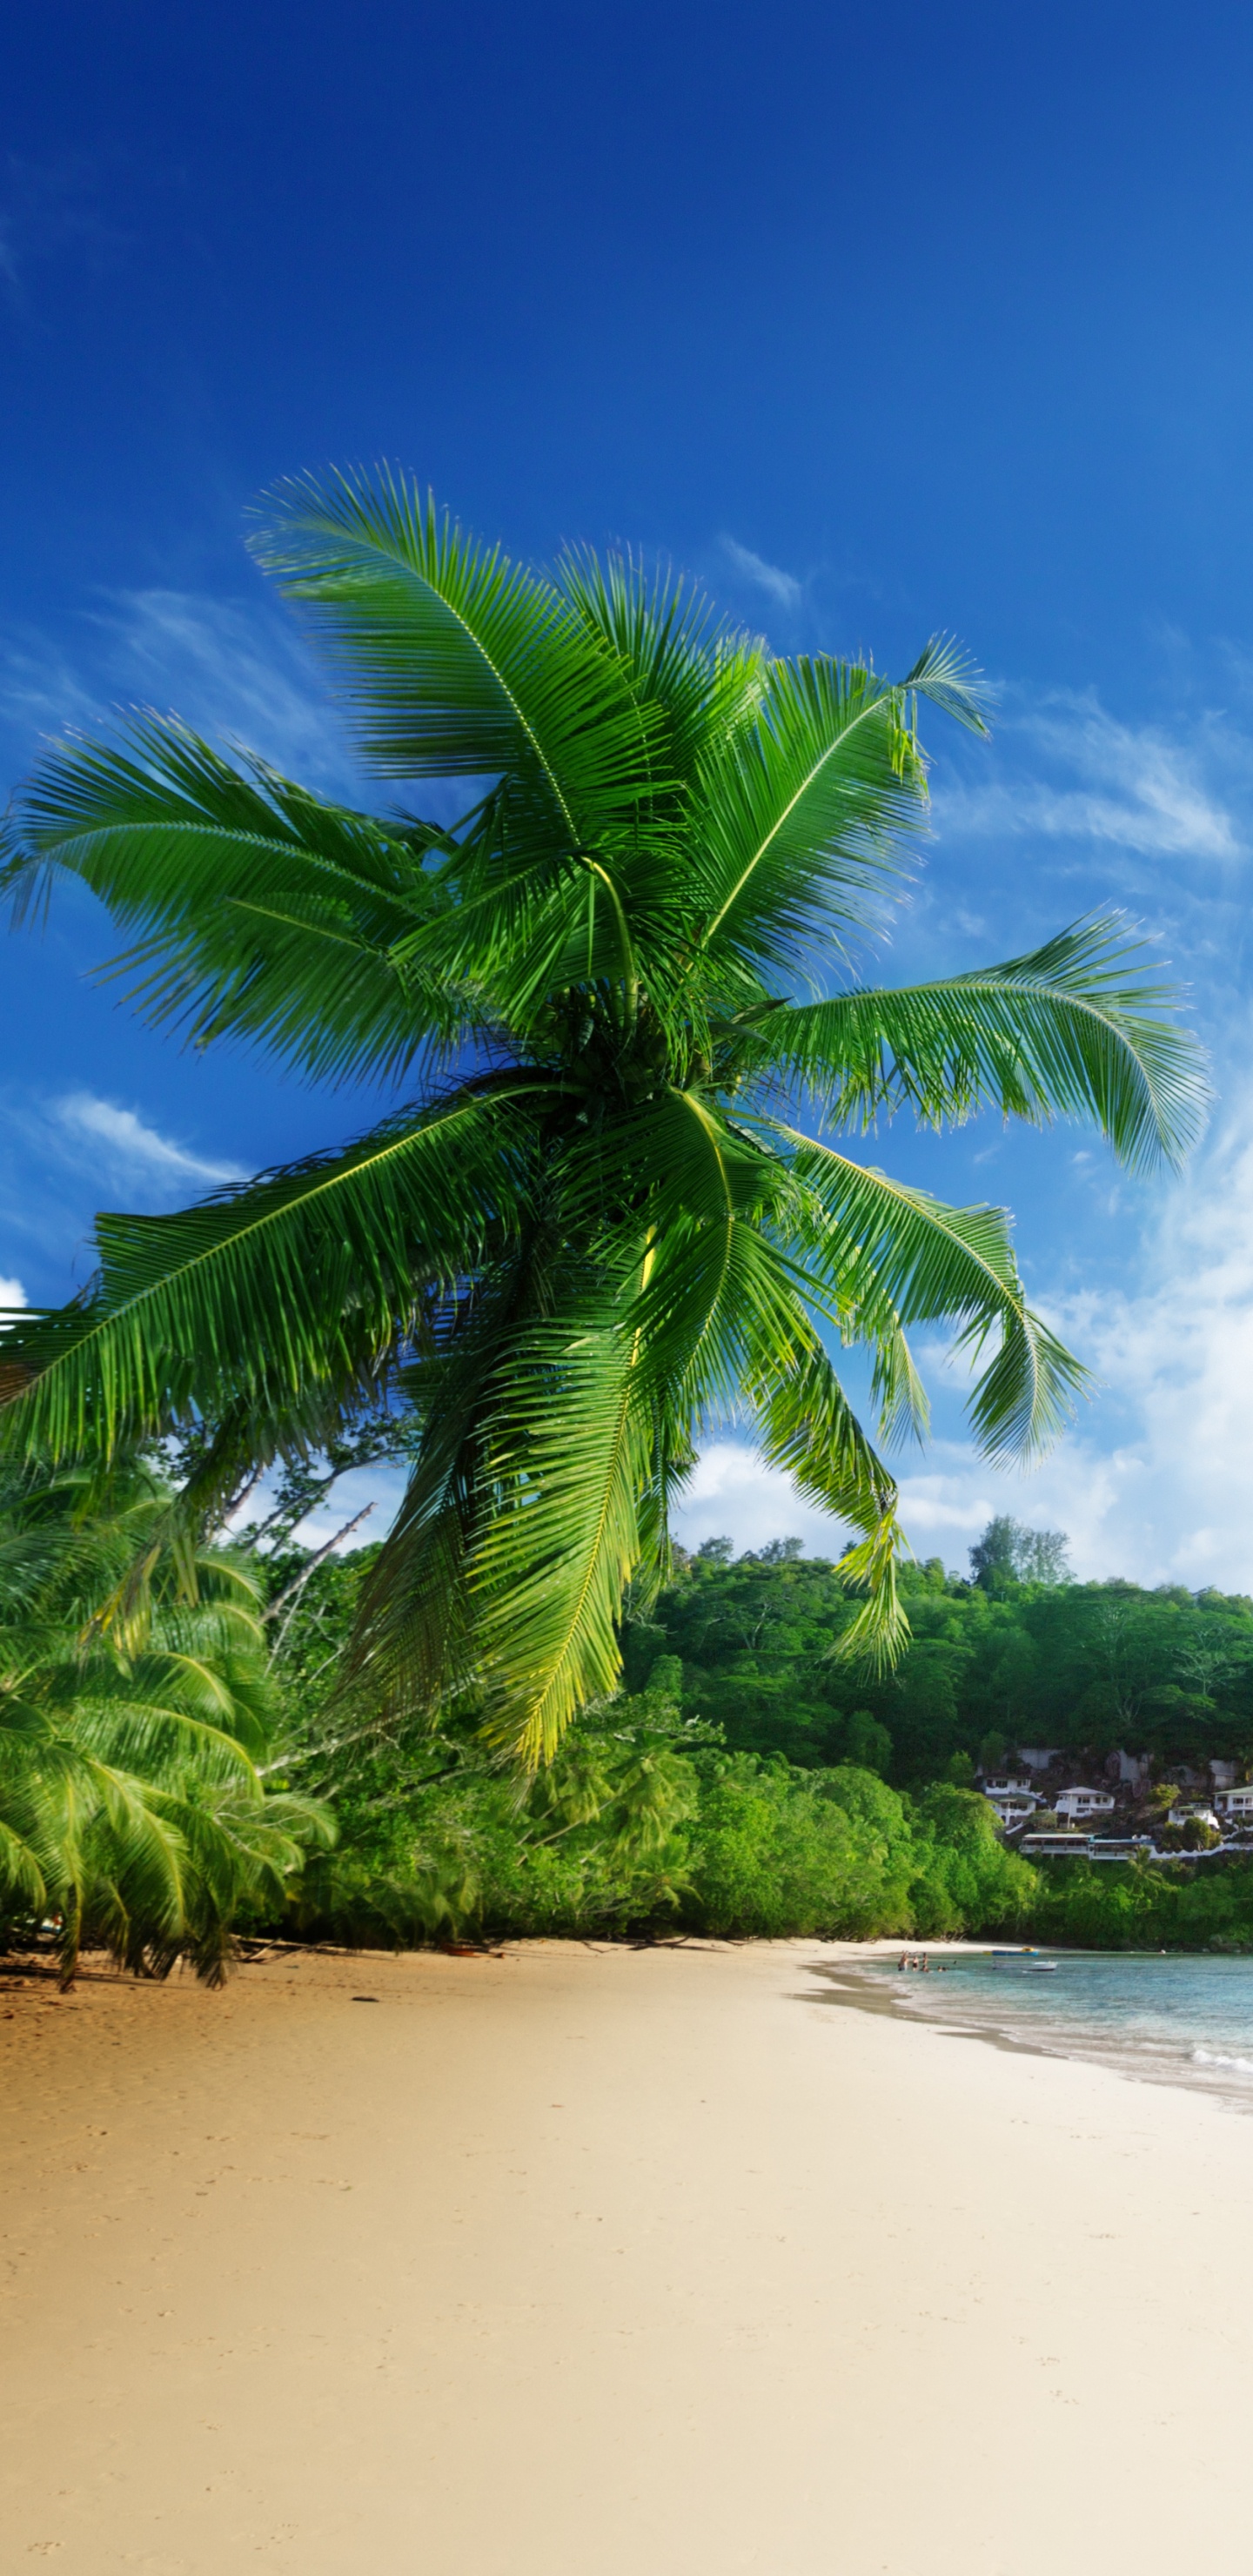 Green Palm Tree on White Sand Beach During Daytime. Wallpaper in 1440x2960 Resolution